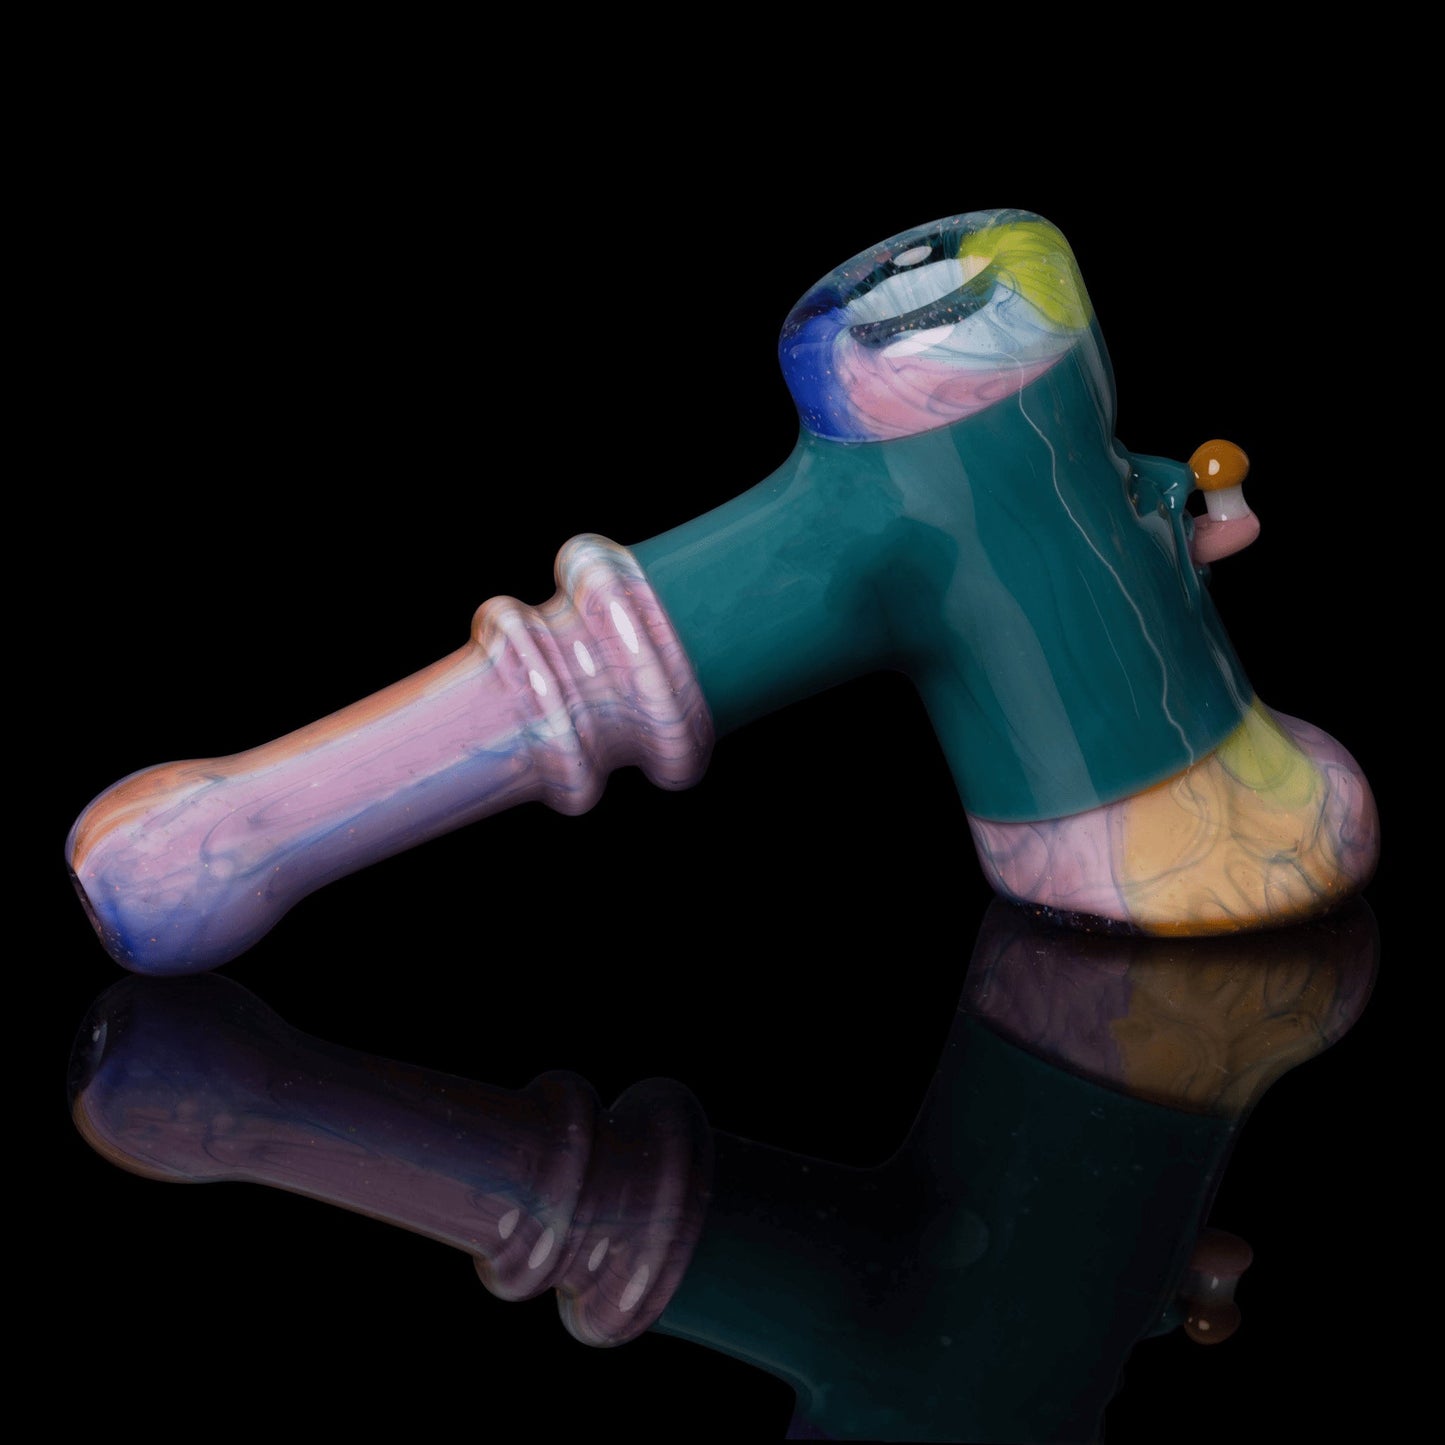 artisan-crafted design of the Collab Daytripper Series Dry Pipe by GPS x Scomo Moanet (Scribble Season 2022)